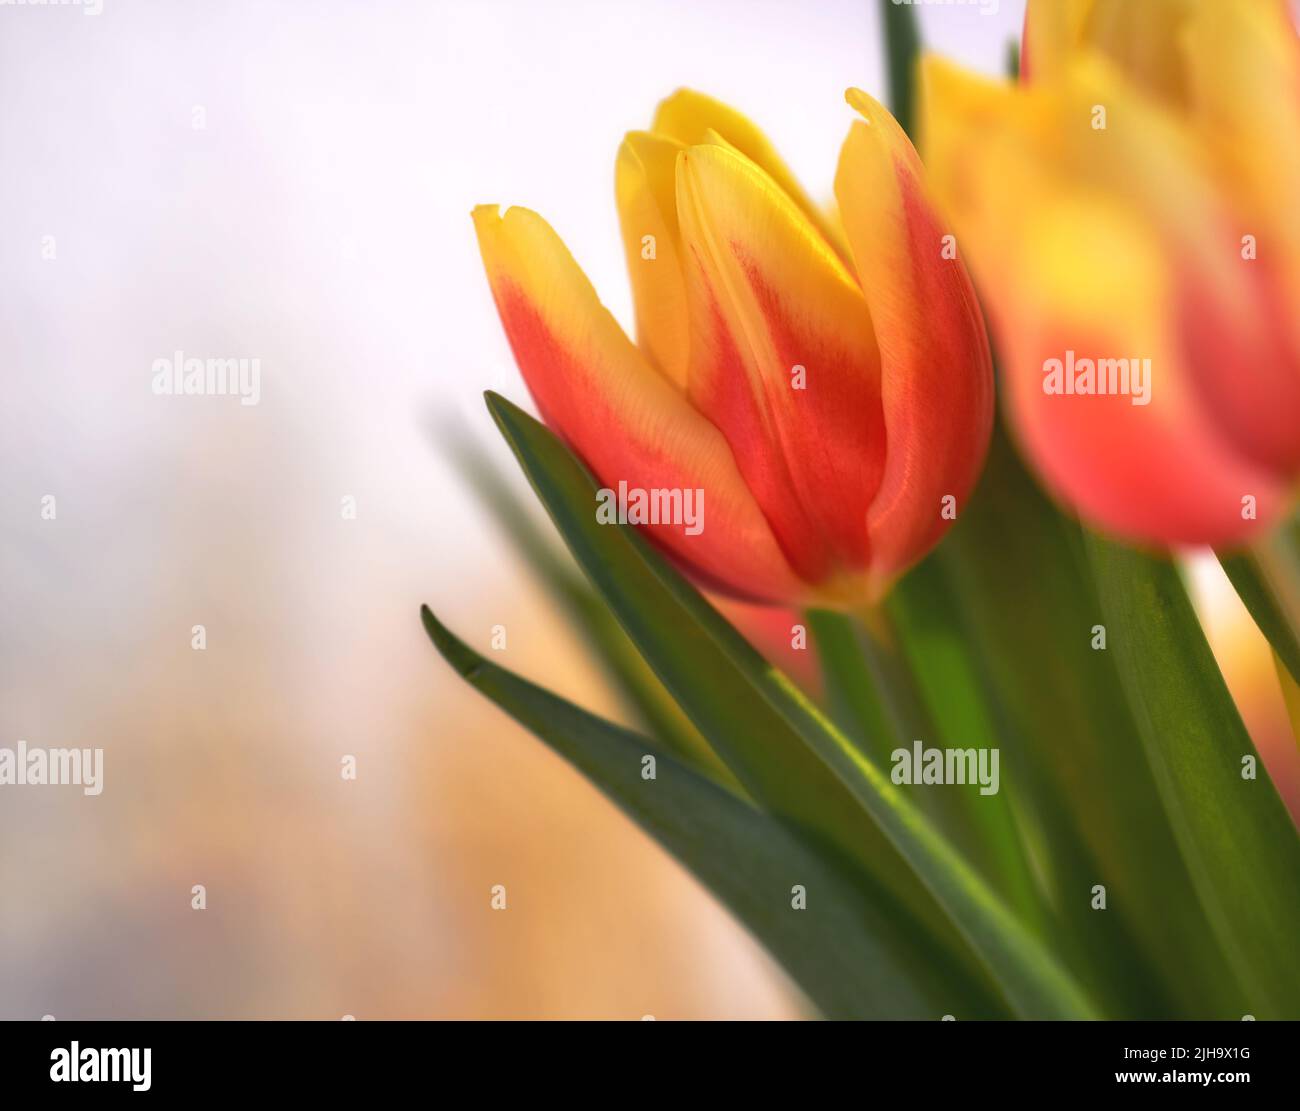 Closeup of orange tulips on isolated background with copy space. A bouquet or bunch of beautiful tulip flowers with green stems grown as ornaments for Stock Photo